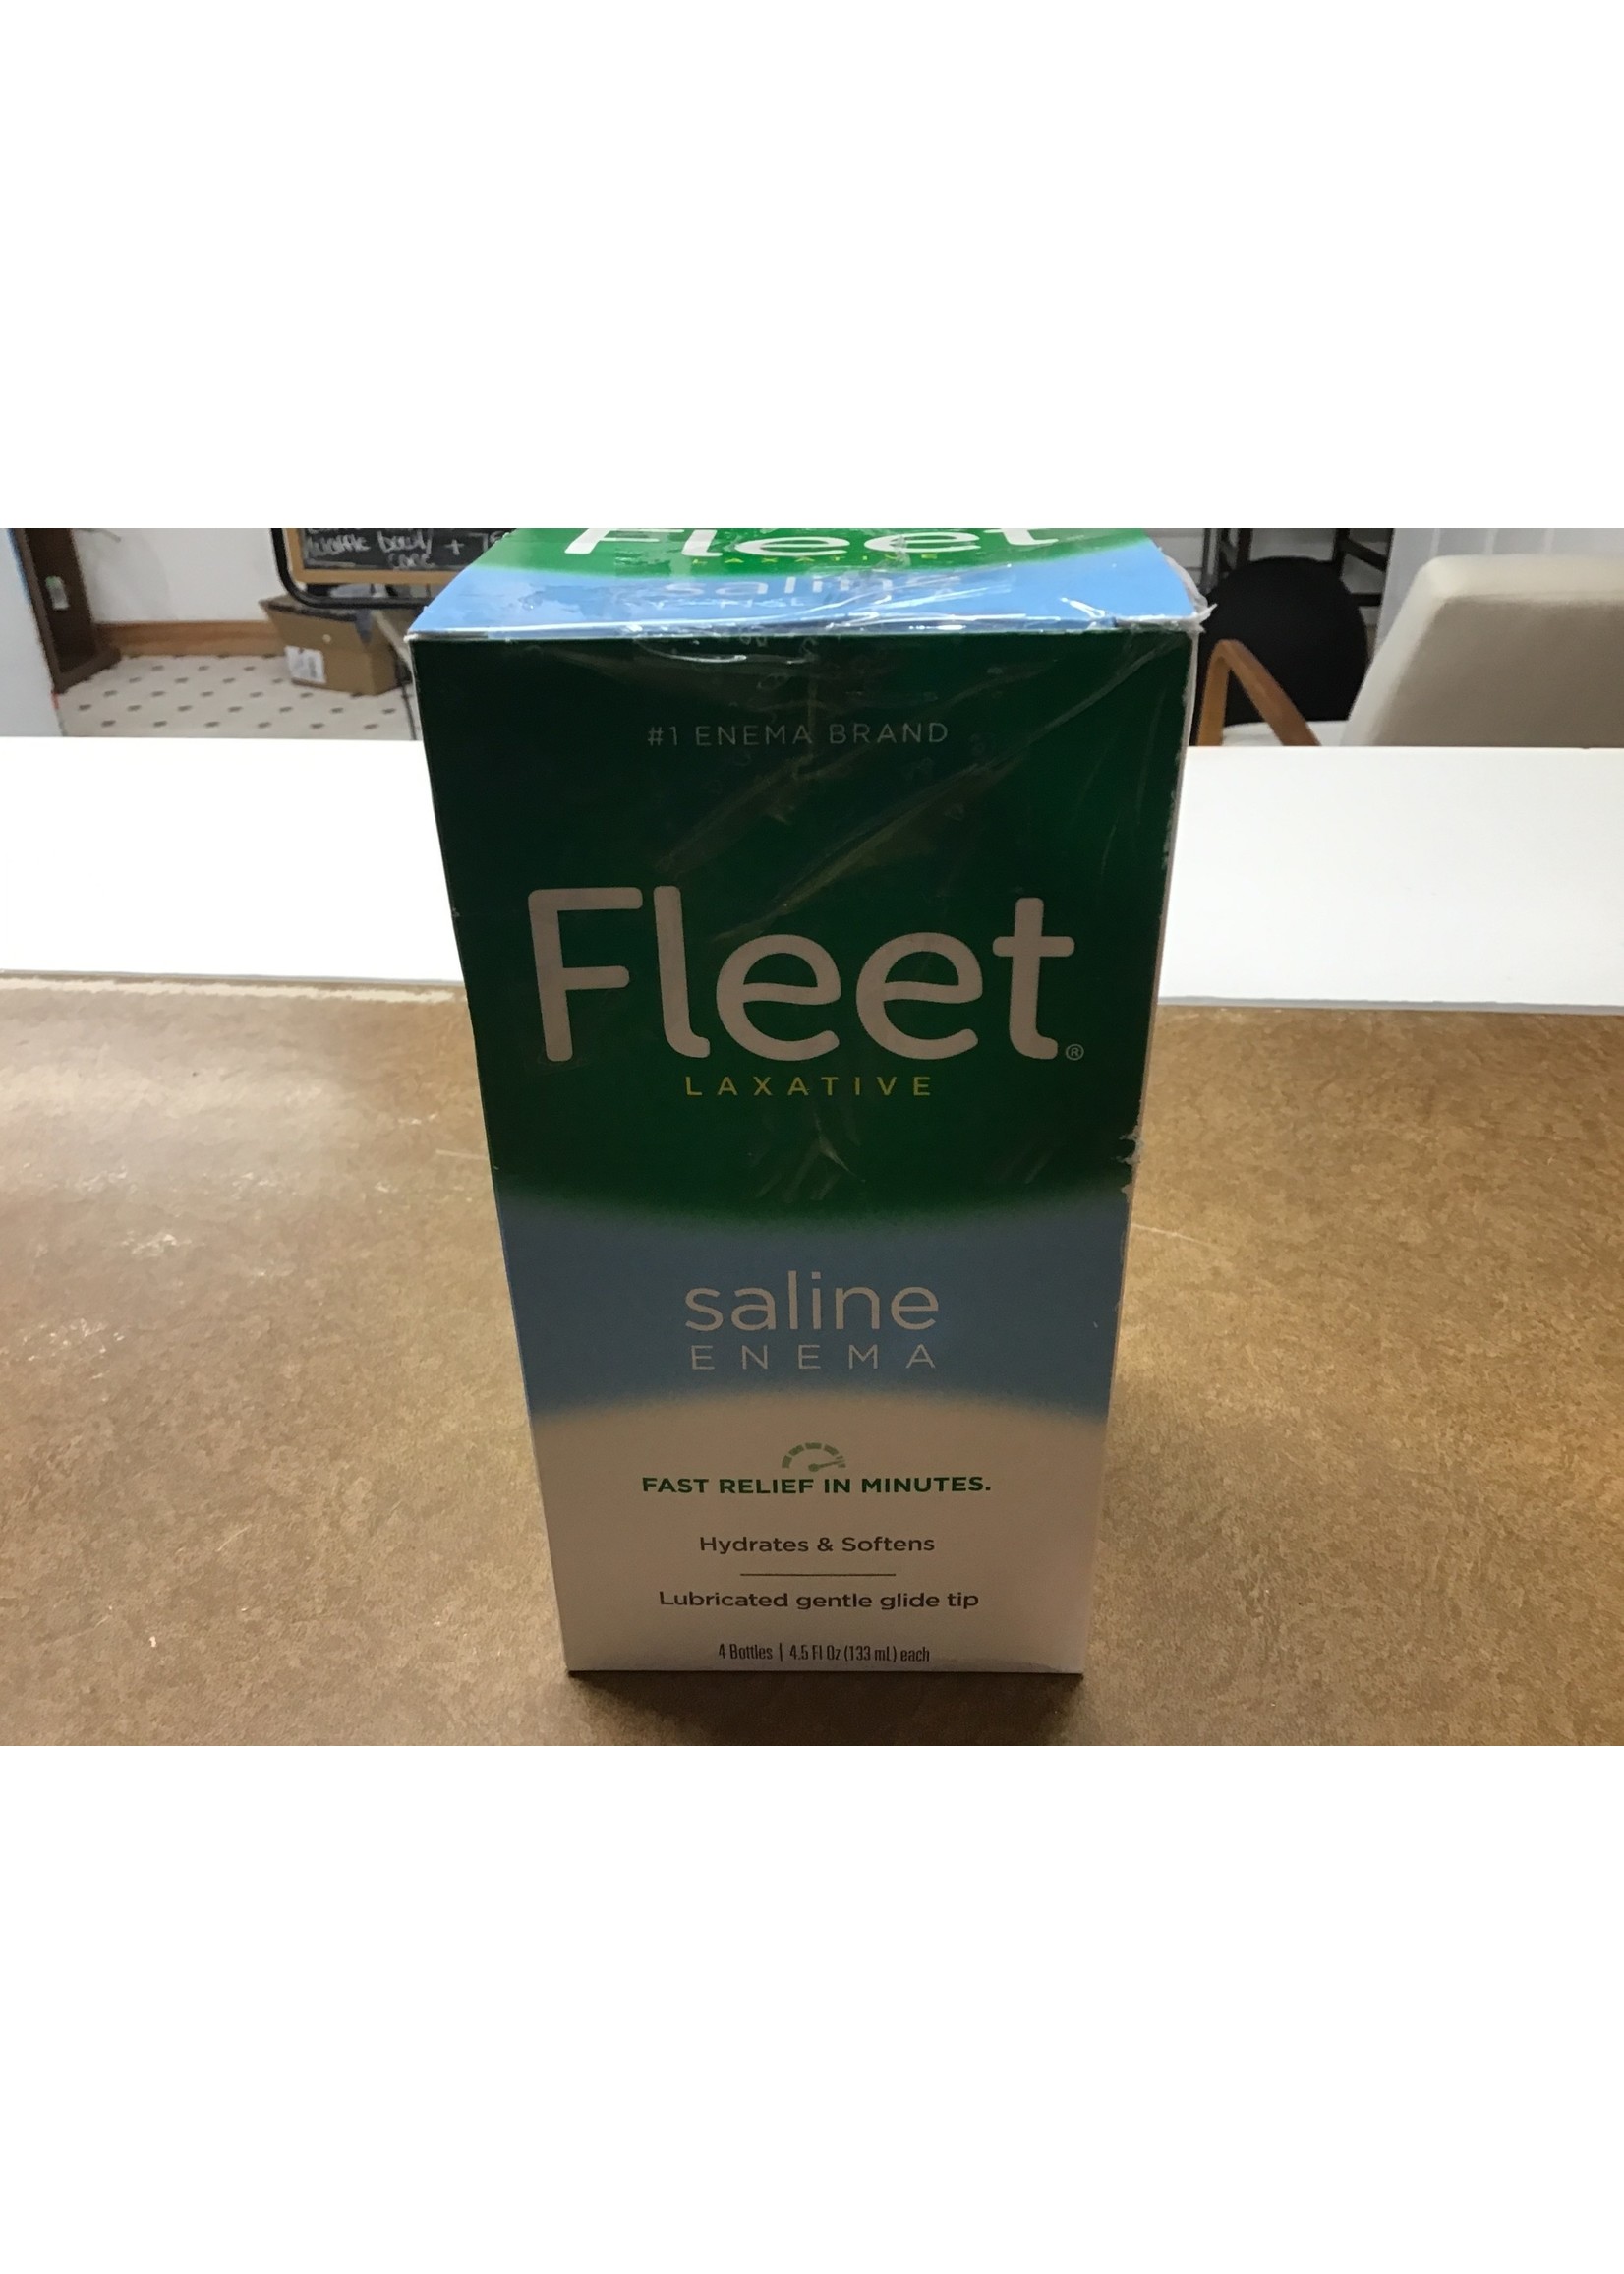 *only 3 in package* Fleet Laxative Saline Enema for Adult Constipation - 18 fl oz